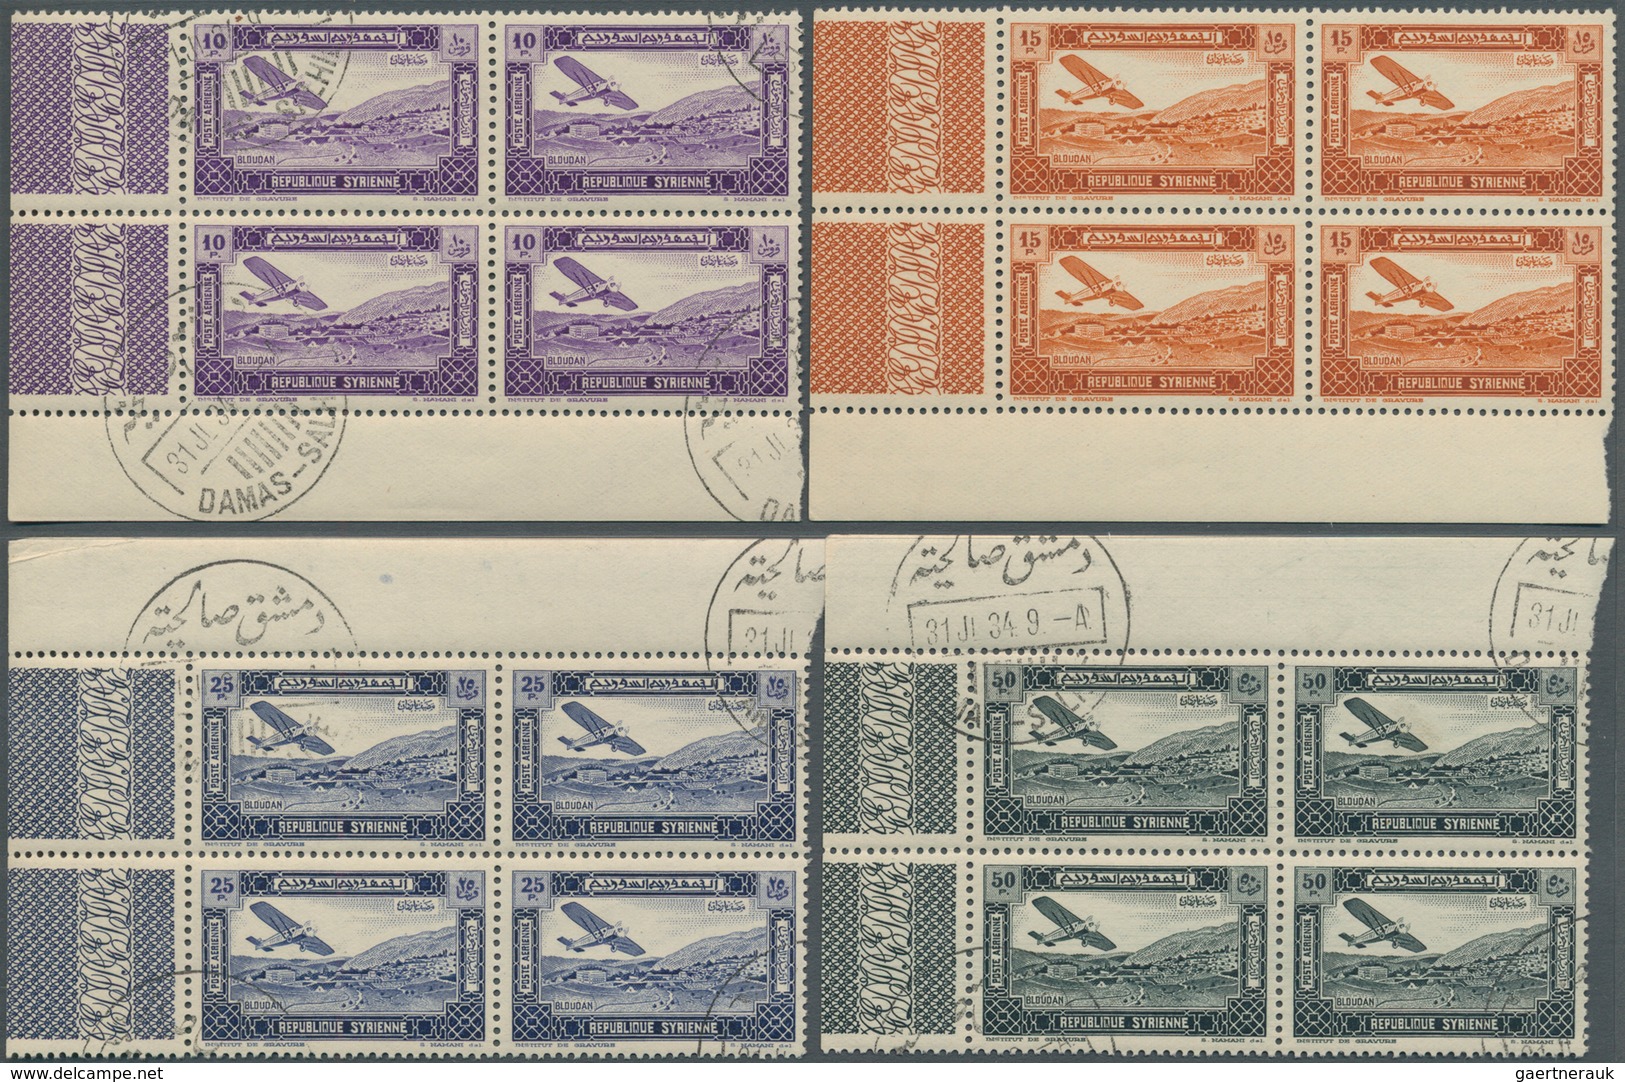 Syrien: 1934, 10th Anniversary of Republic, 0.10pi. to 100pi., complete set of 29 values as marginal